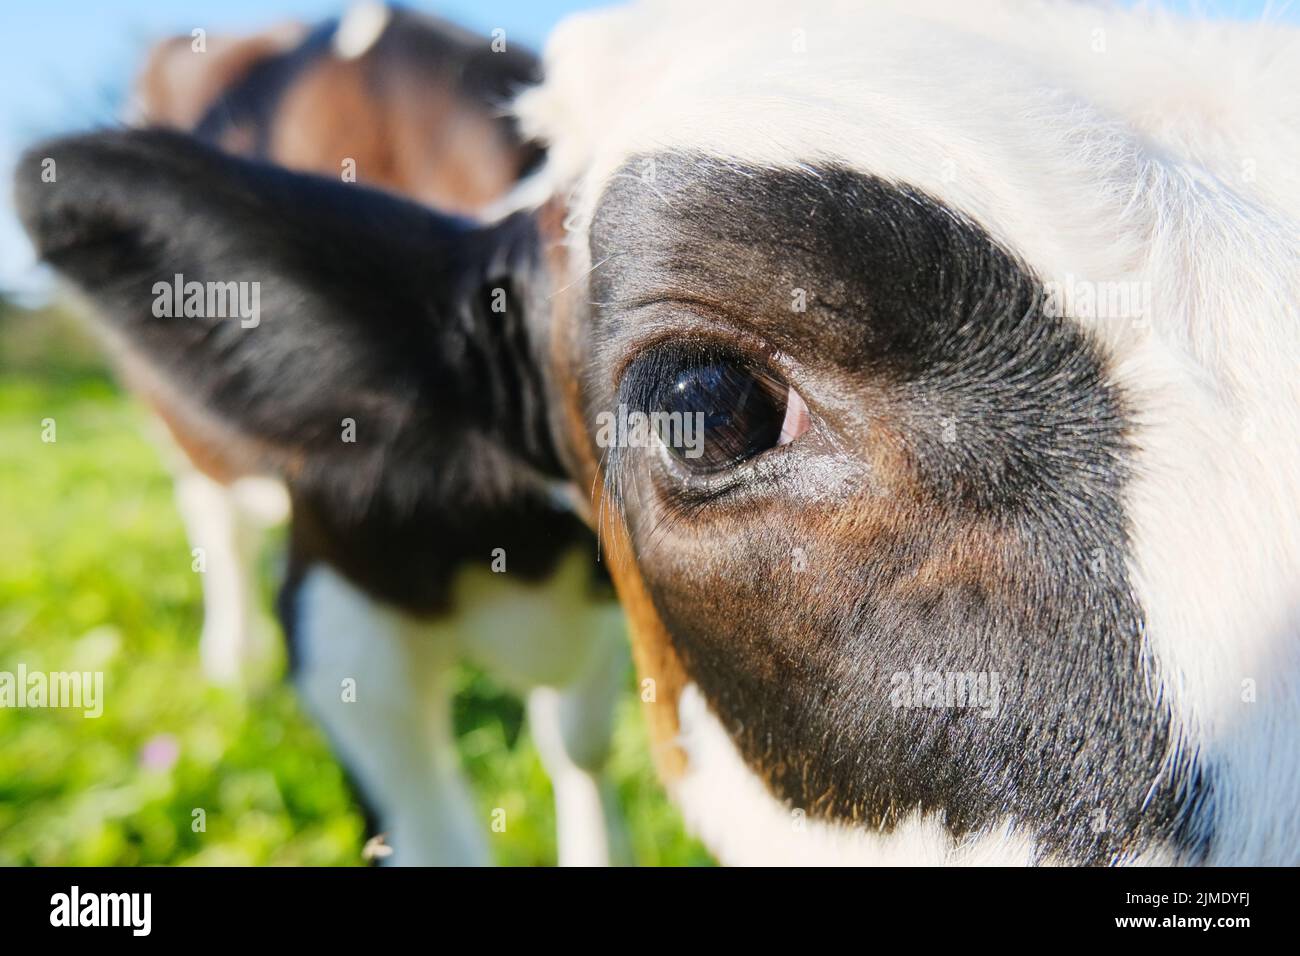 The cow looks at the camera Stock Photo